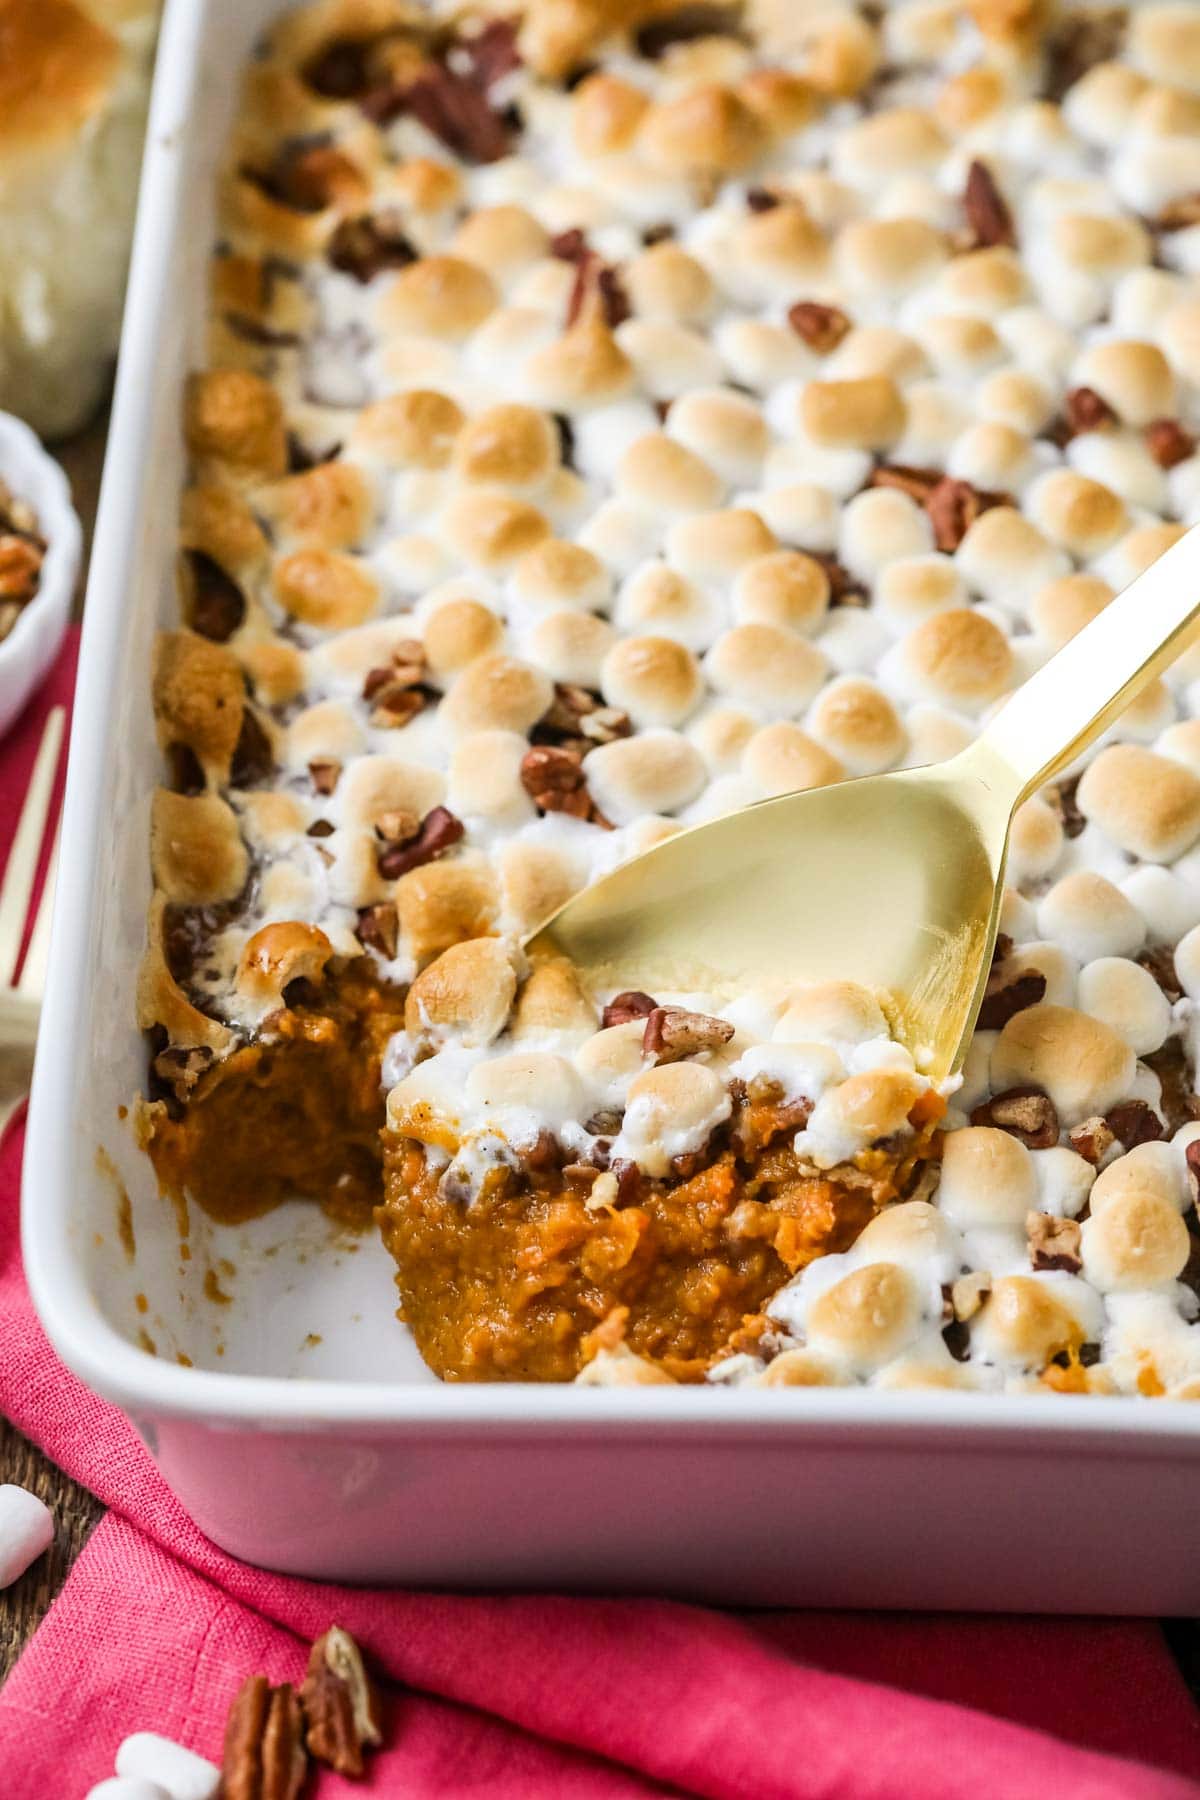 Gold spoon scooping sweet potato casserole out of a white dish.